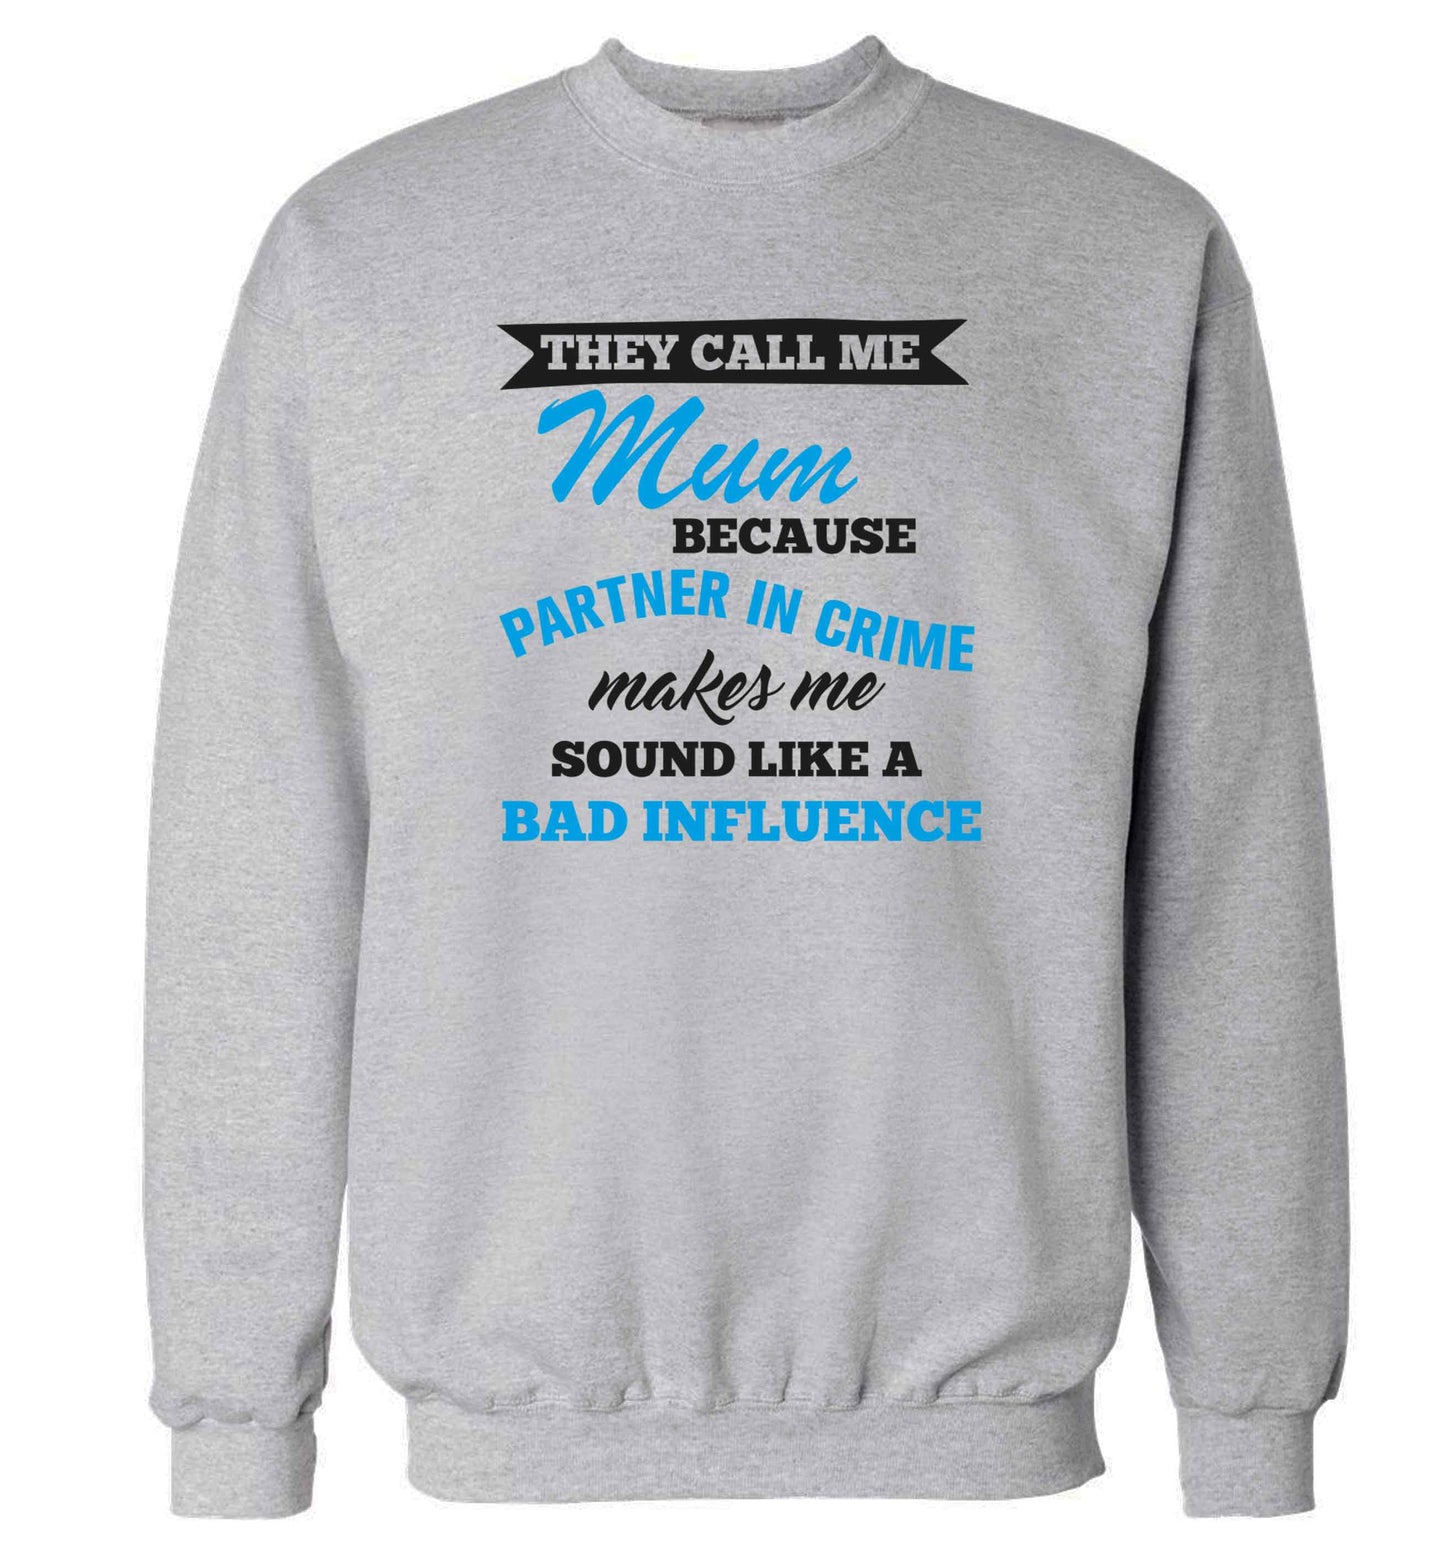 They call me mum because partner in crime makes me sound like a bad influence adult's unisex grey sweater 2XL